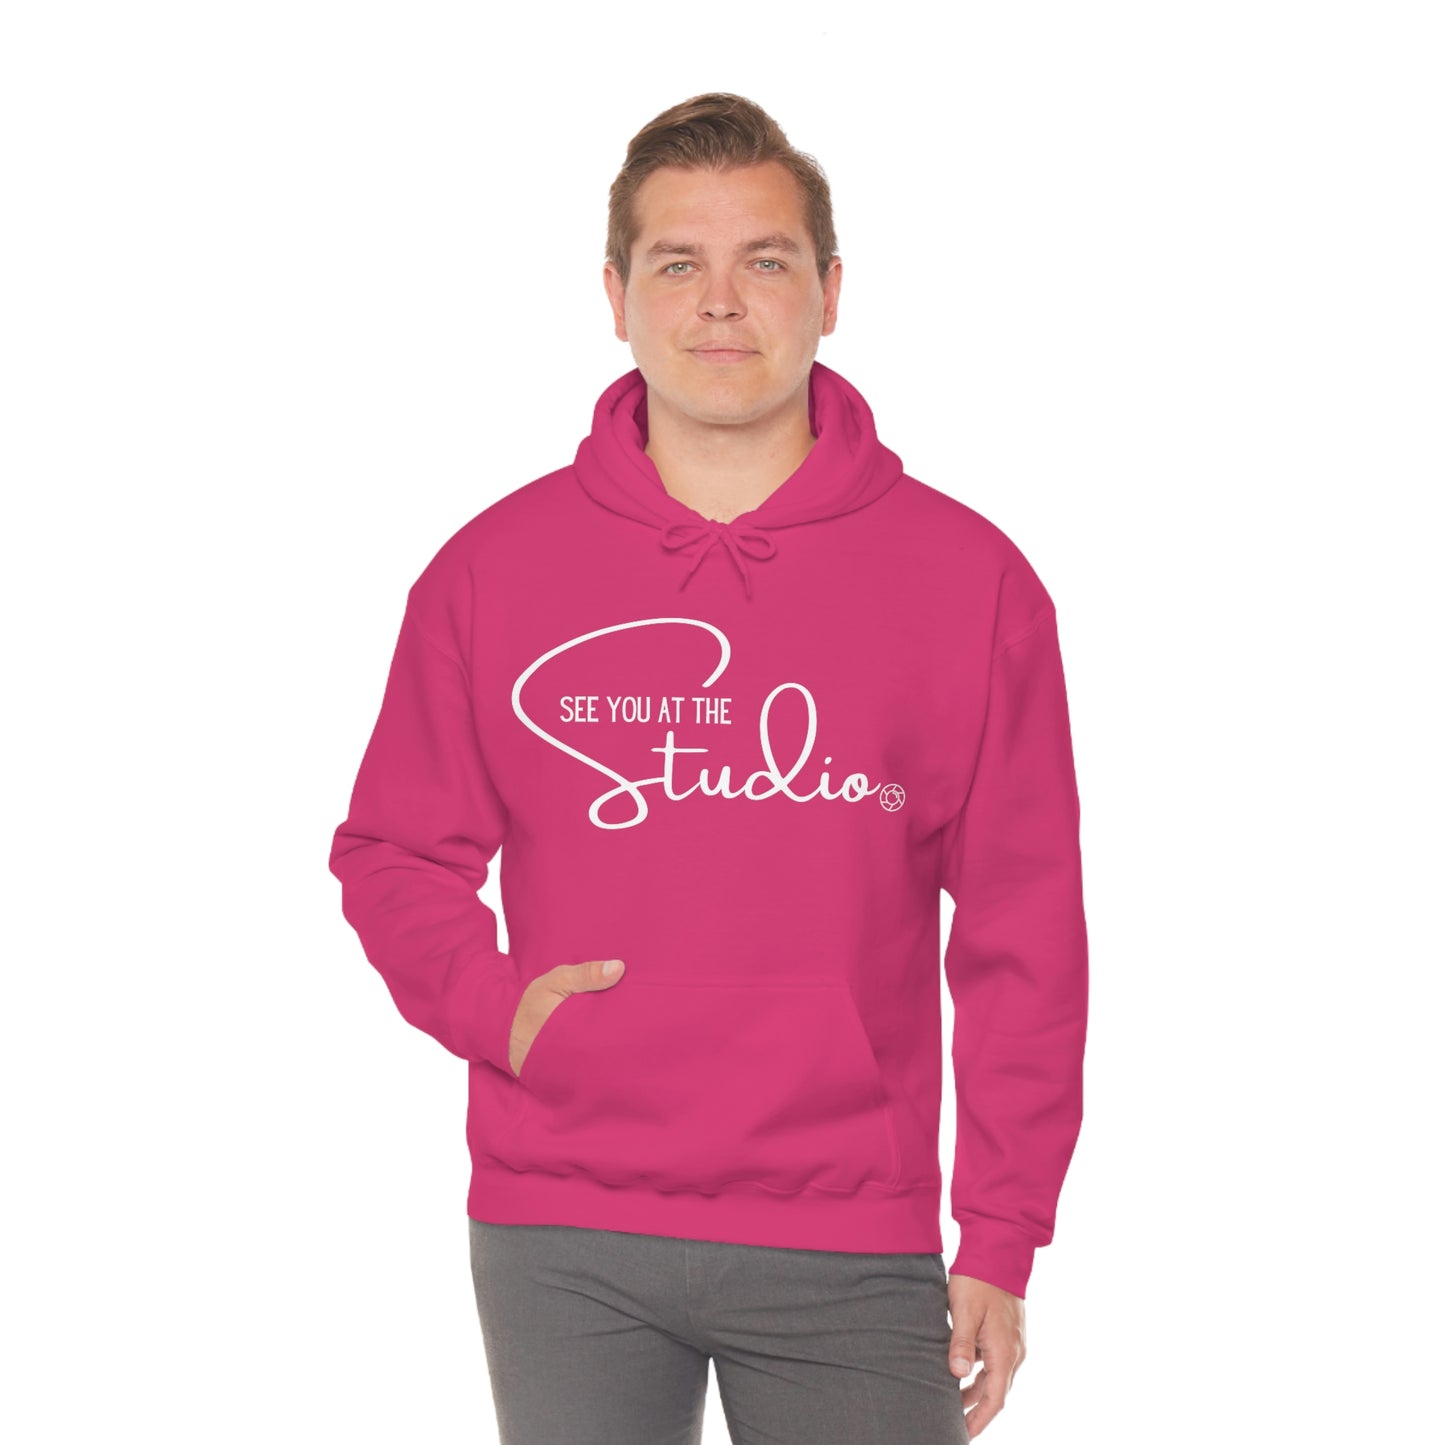 See you at the Studio - Heavy Blend™ Hooded Sweatshirt